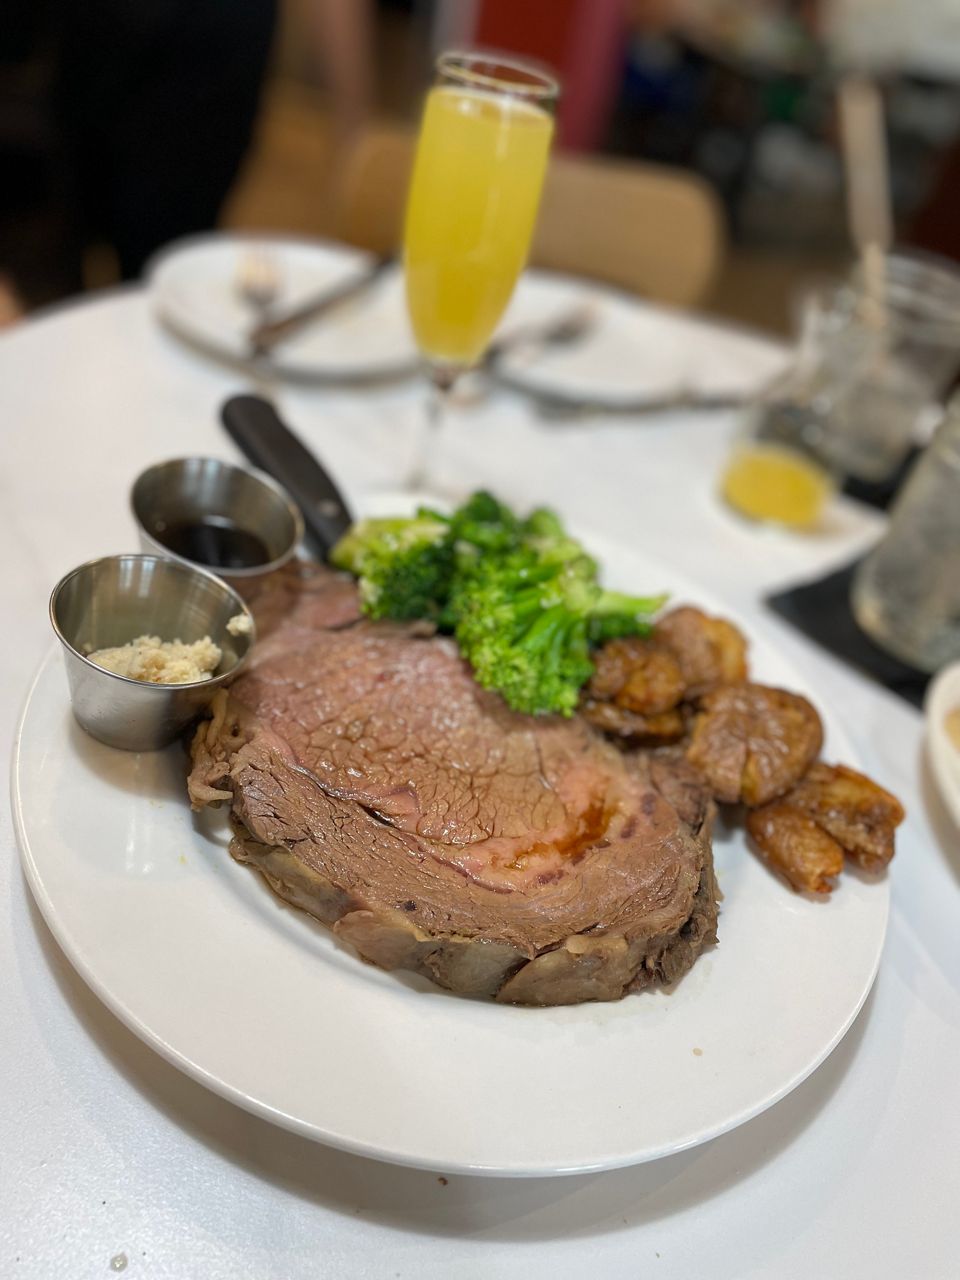 Scratch Kitchen and Meatery's smoked prime rib is offered every Thursday. (Spectrum News/Lianne Bidal Thompson)